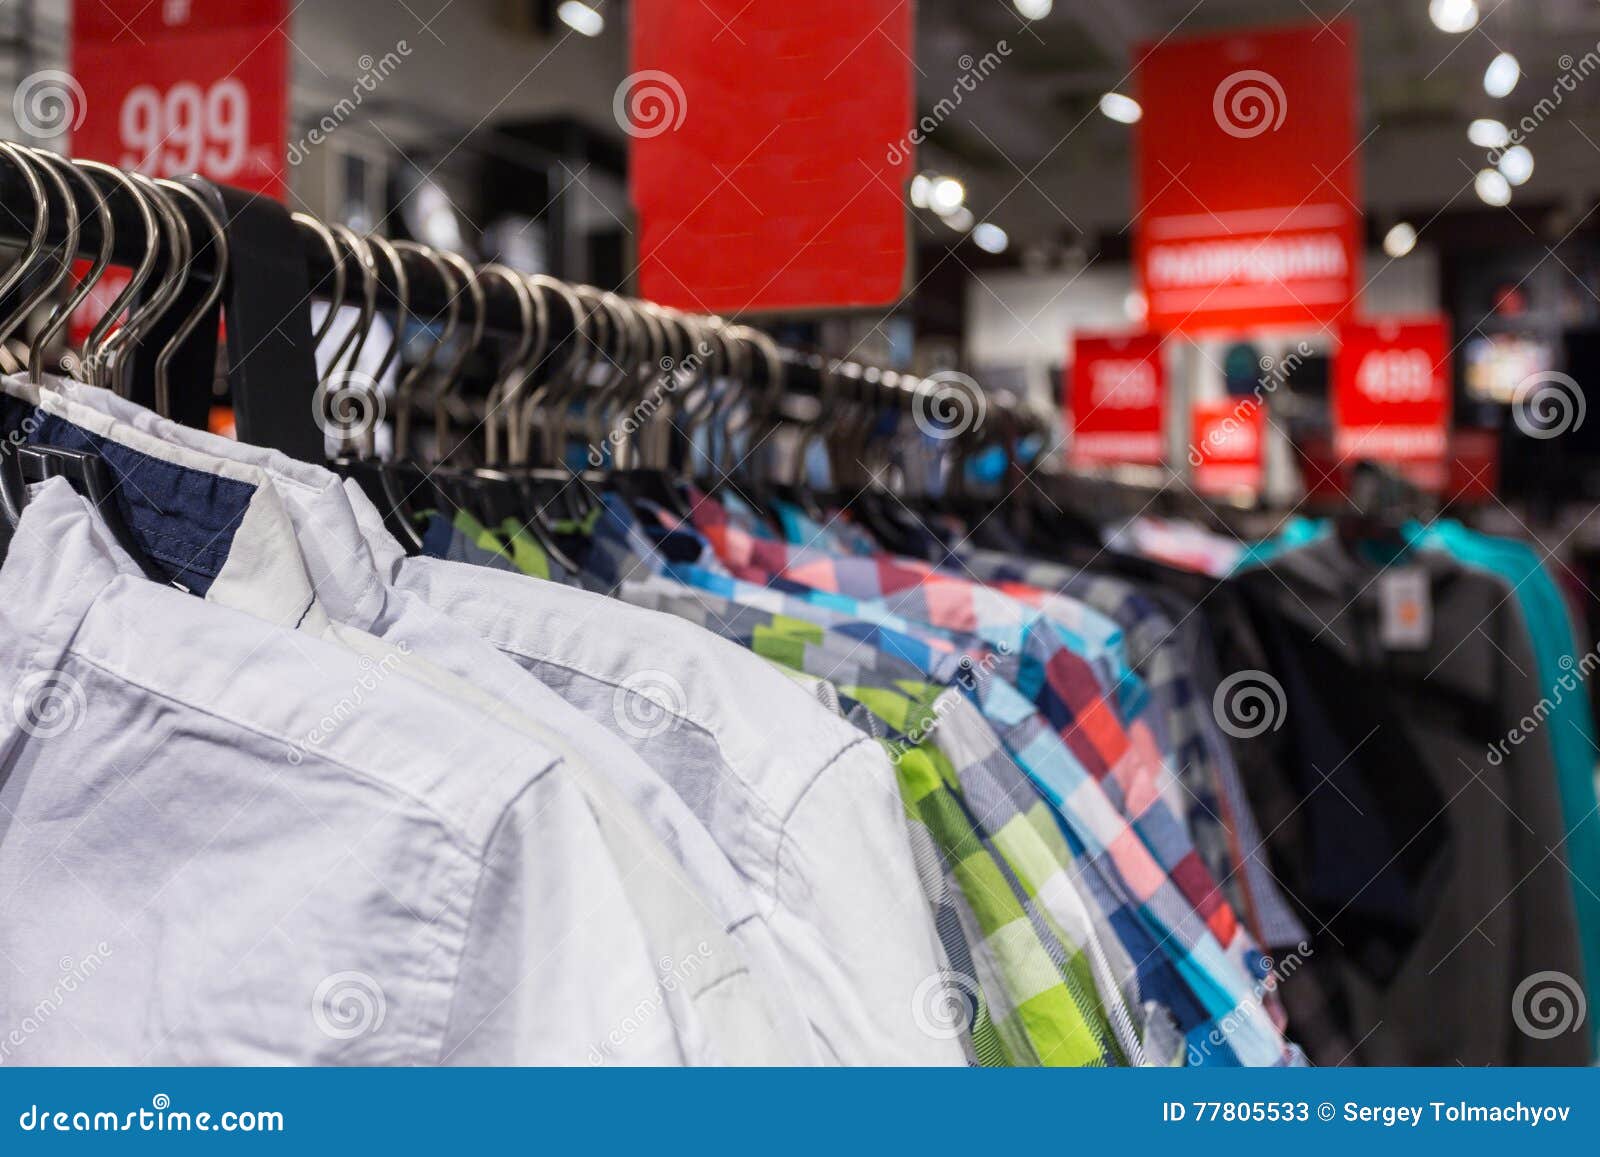 Open Clothes Rail stock image. Image of hand, cold, open - 77805533